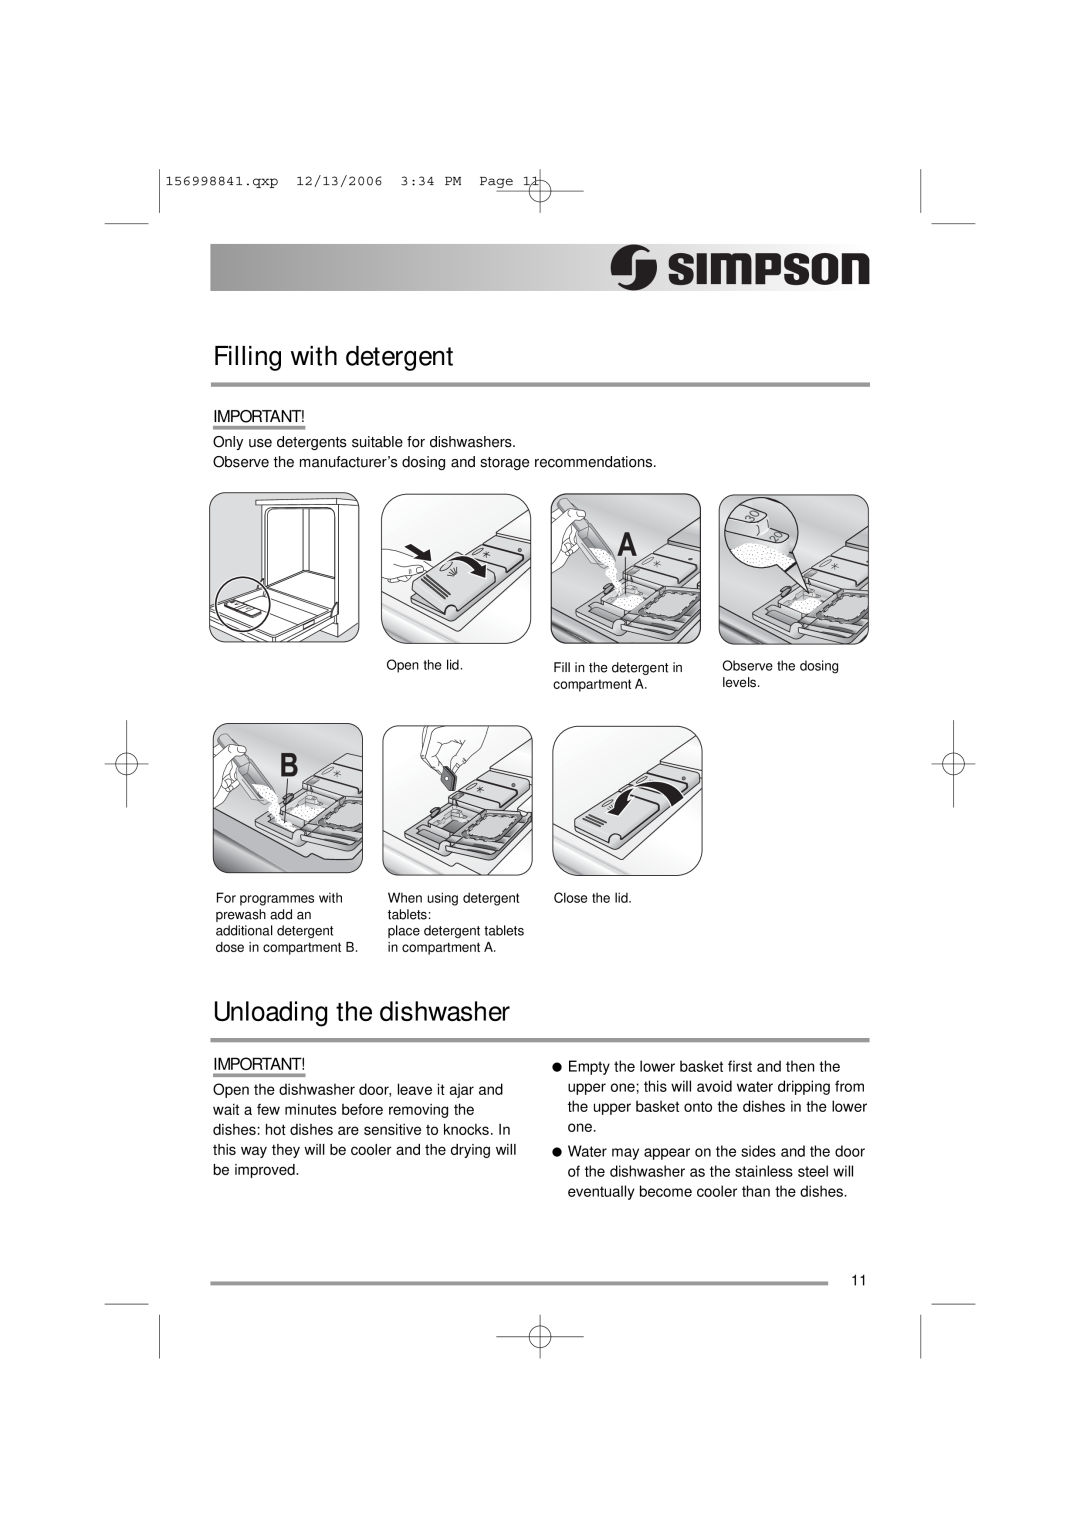 Simpson 52C850 user manual Filling with detergent, Unloading the dishwasher, Only use detergents suitable for dishwashers 